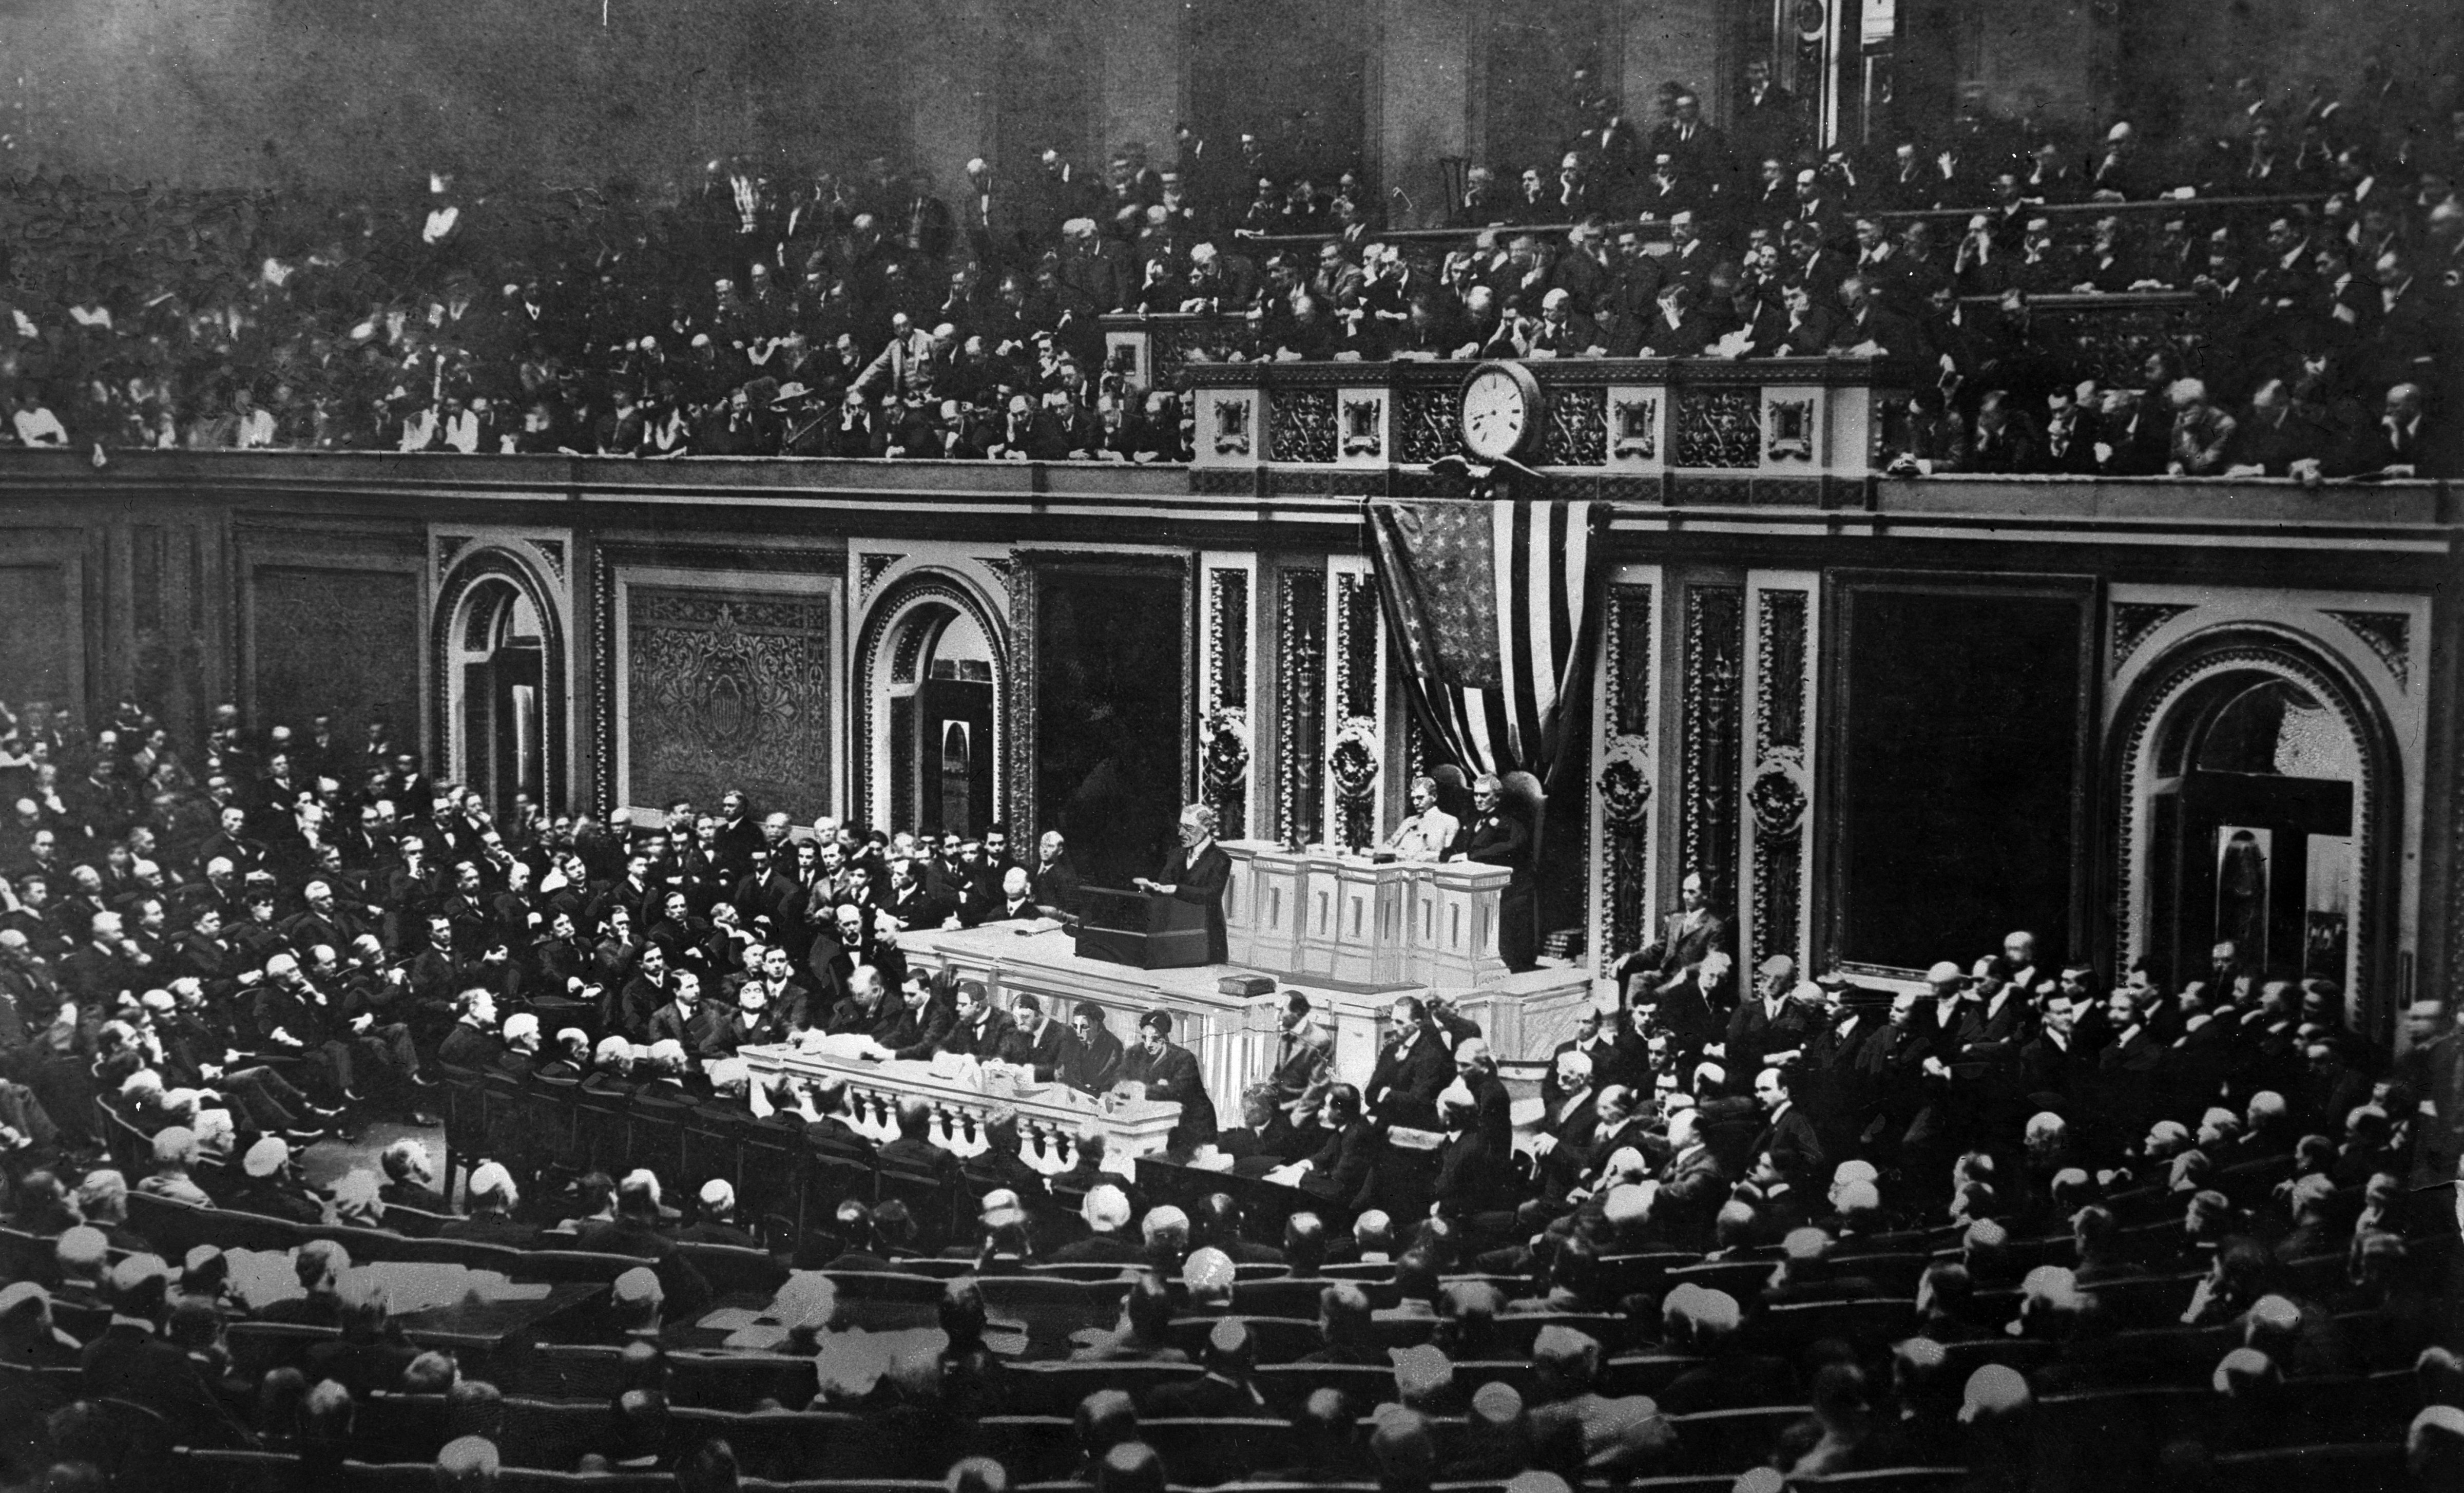 President Woodrow Wilson asks Congress to send U.S. troops into battle against Germany in World War I, in his address to Congress in Washington D.C. on April 2, 1917. (The Stanley Weston Archive—Getty Images)